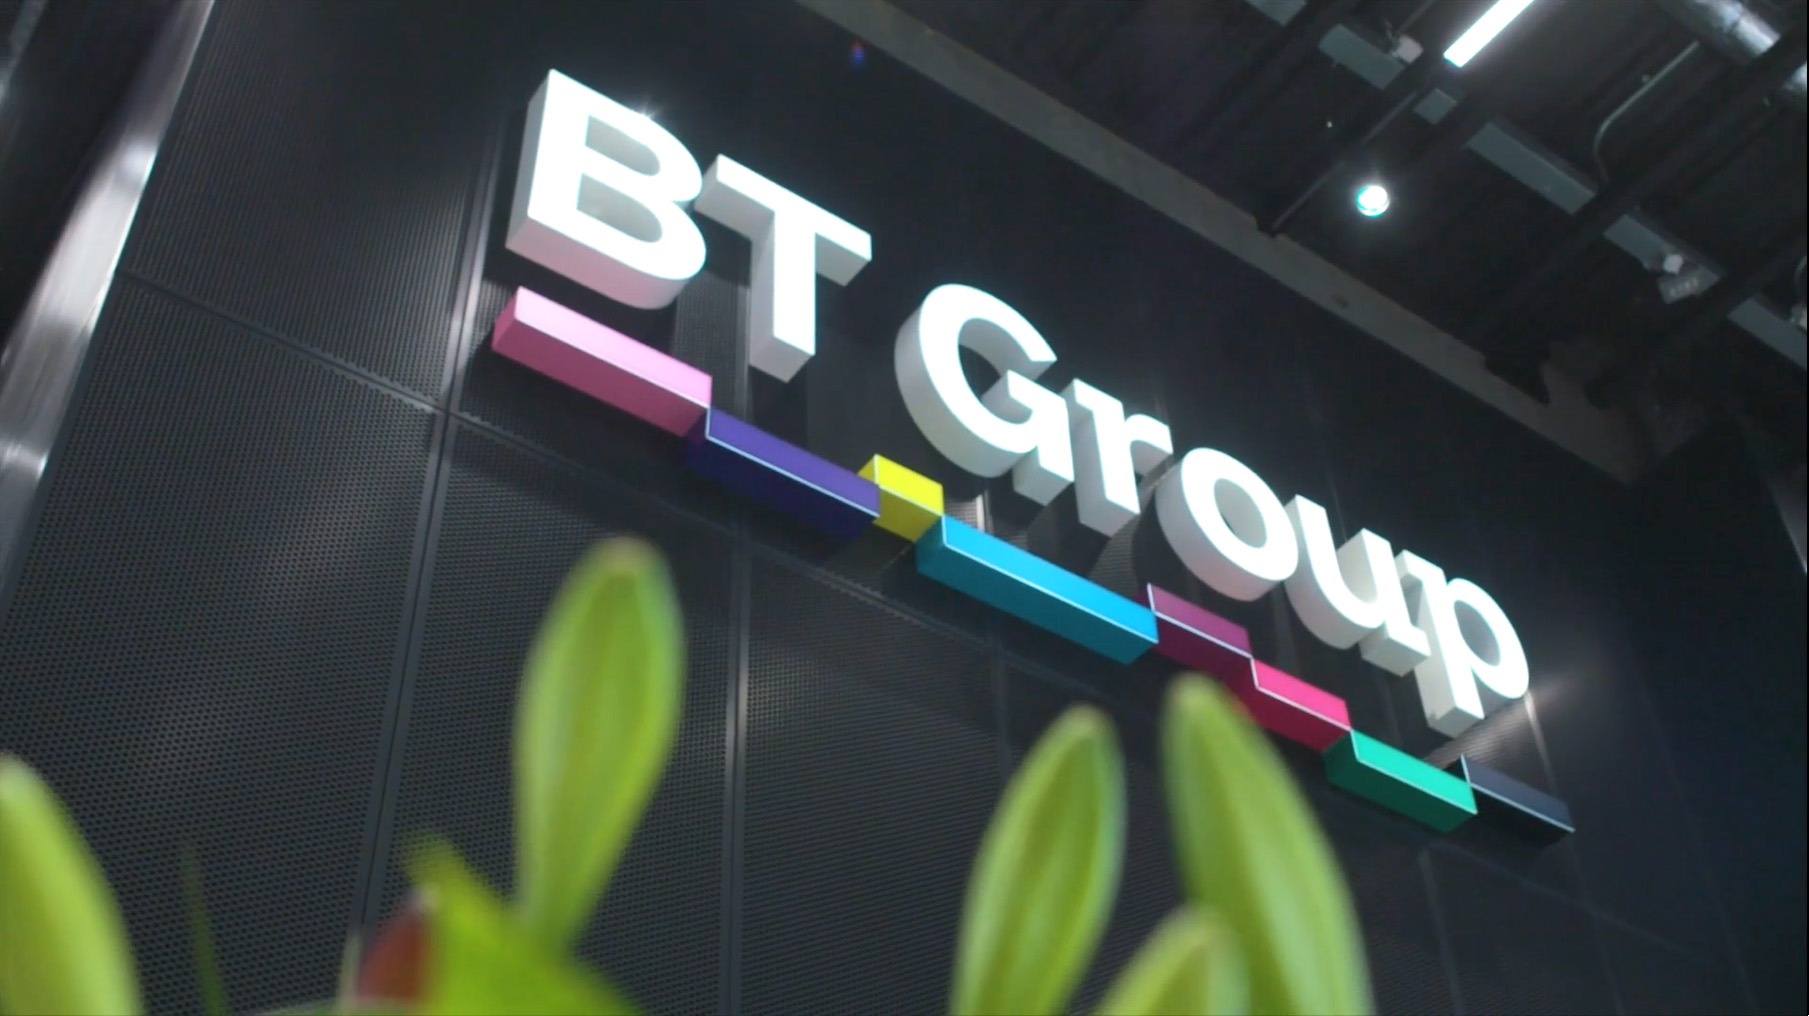 BT abandons above-inflation price rises for mobile customers